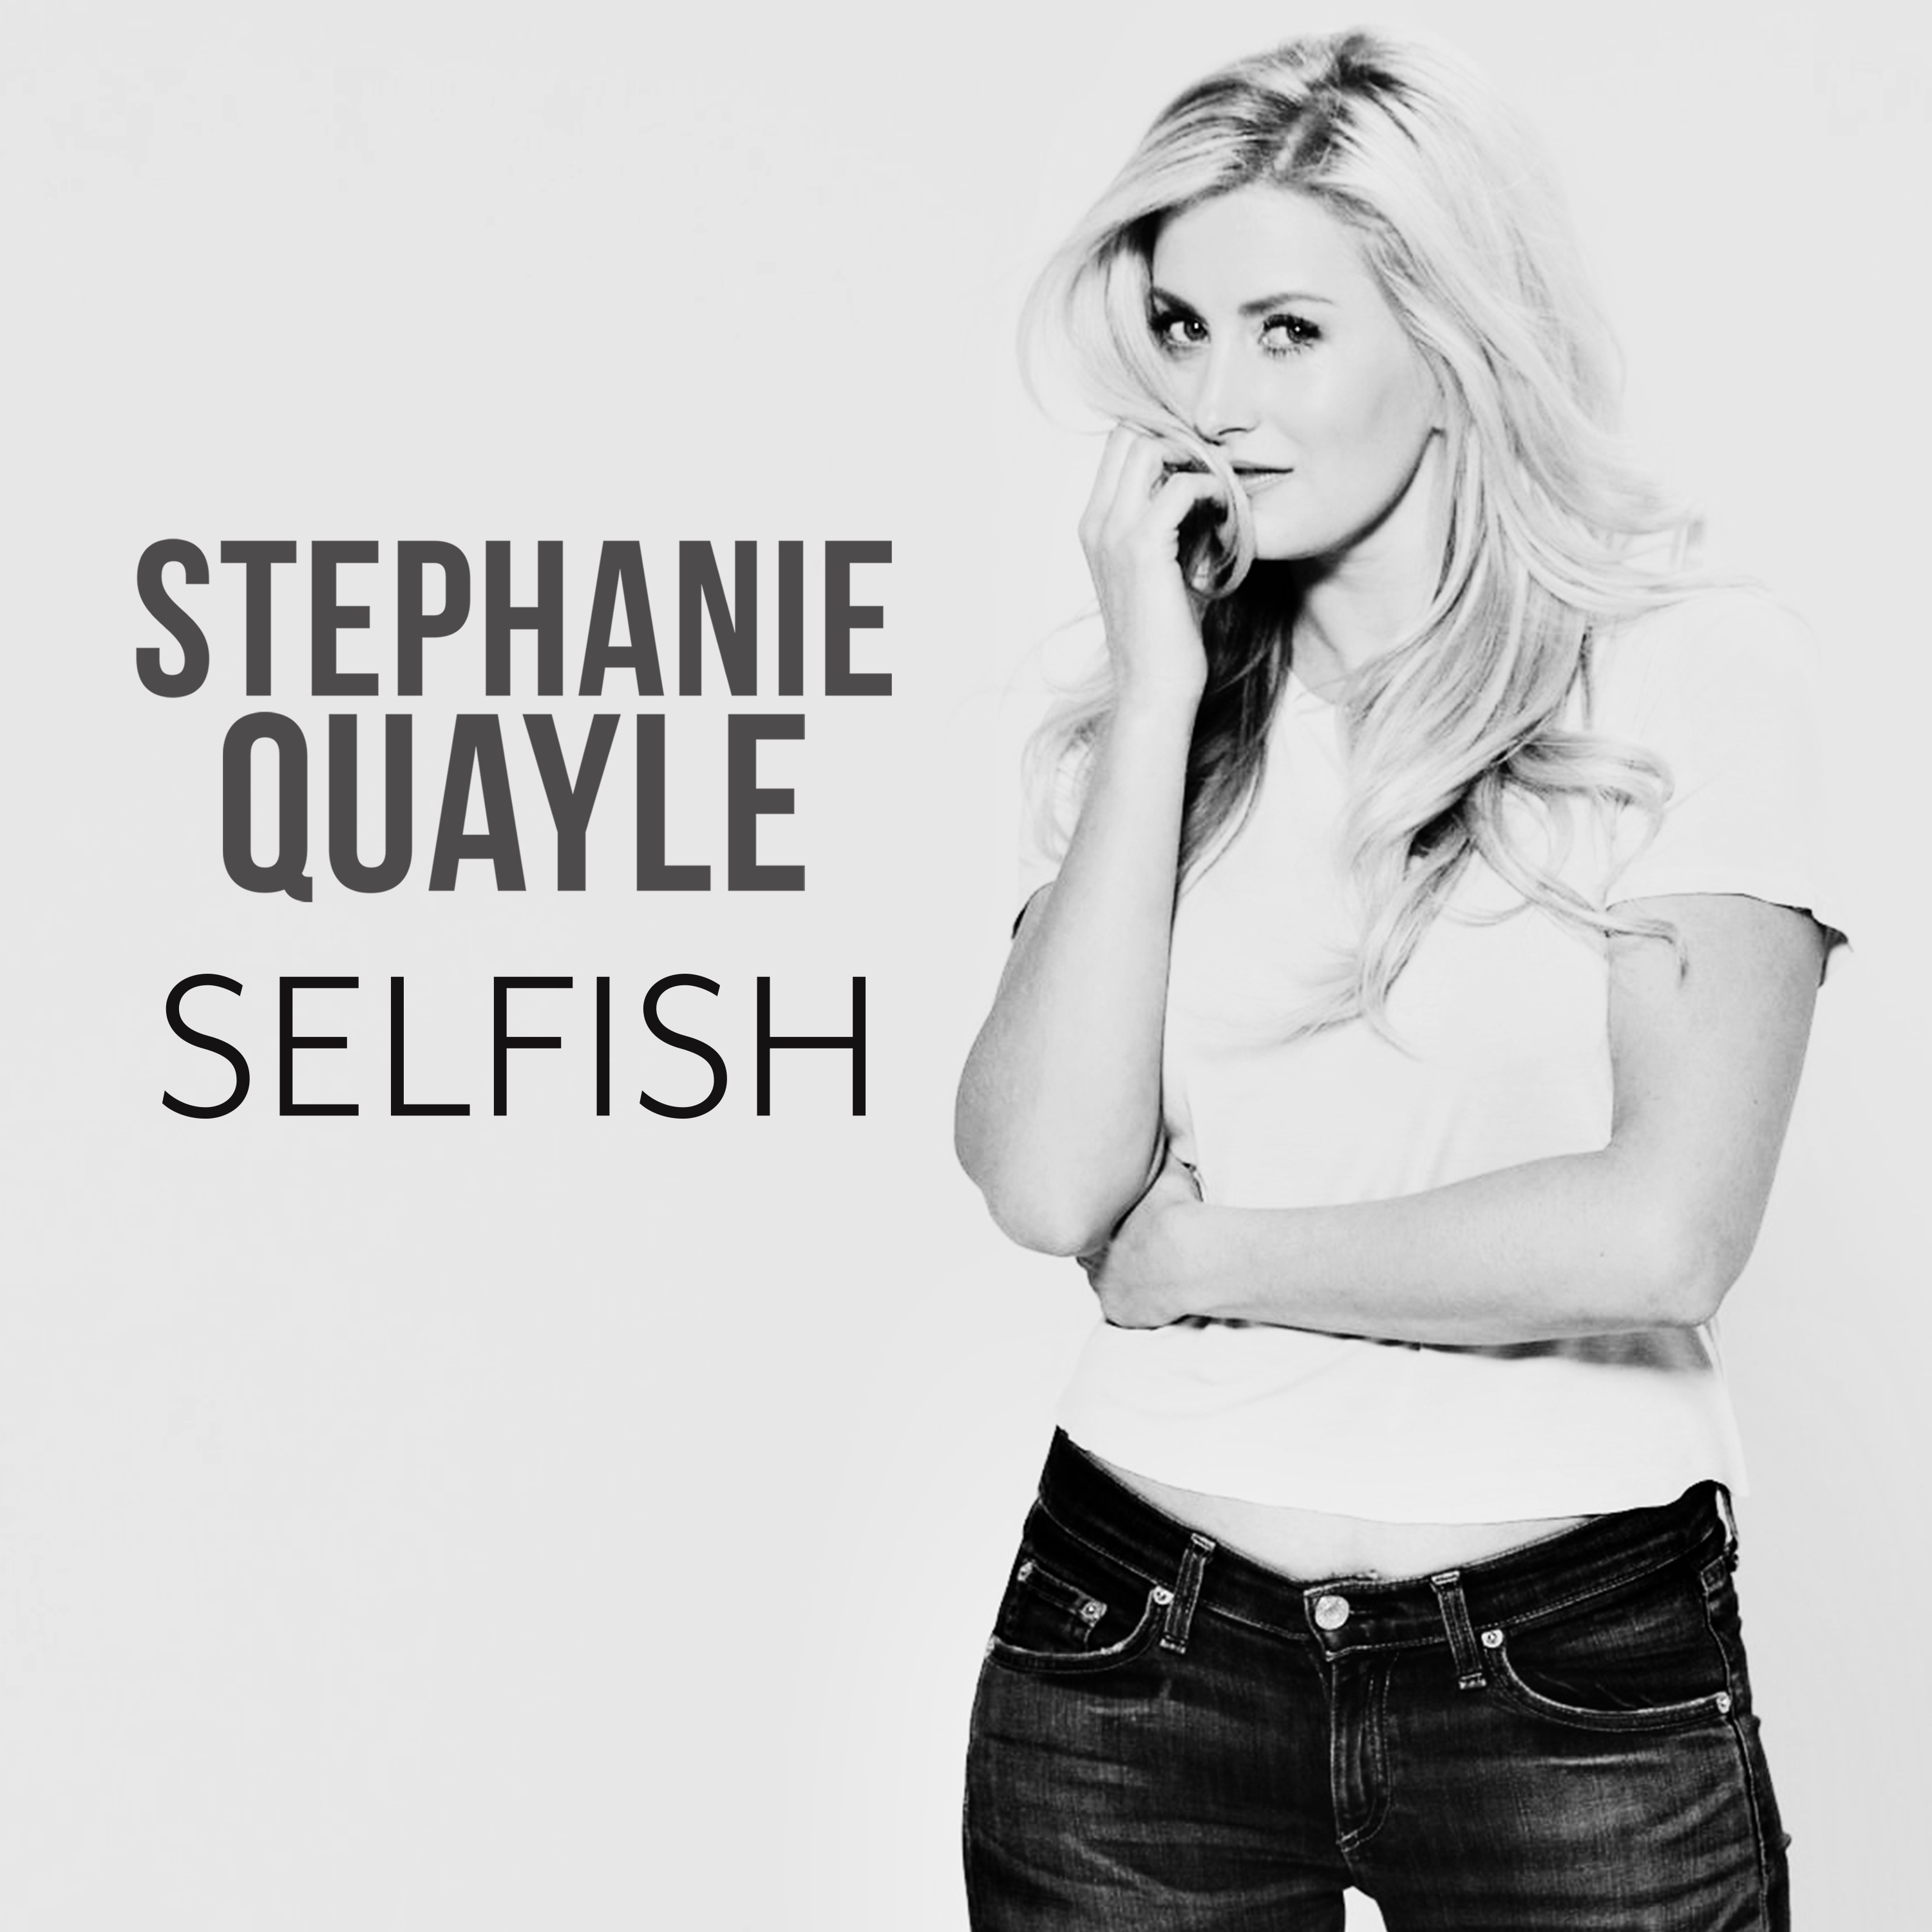 Stephanie Quayle Opens Up About Making ‘Love The Way You See Me’ + Releases Stripped Down Version of “Selfish”